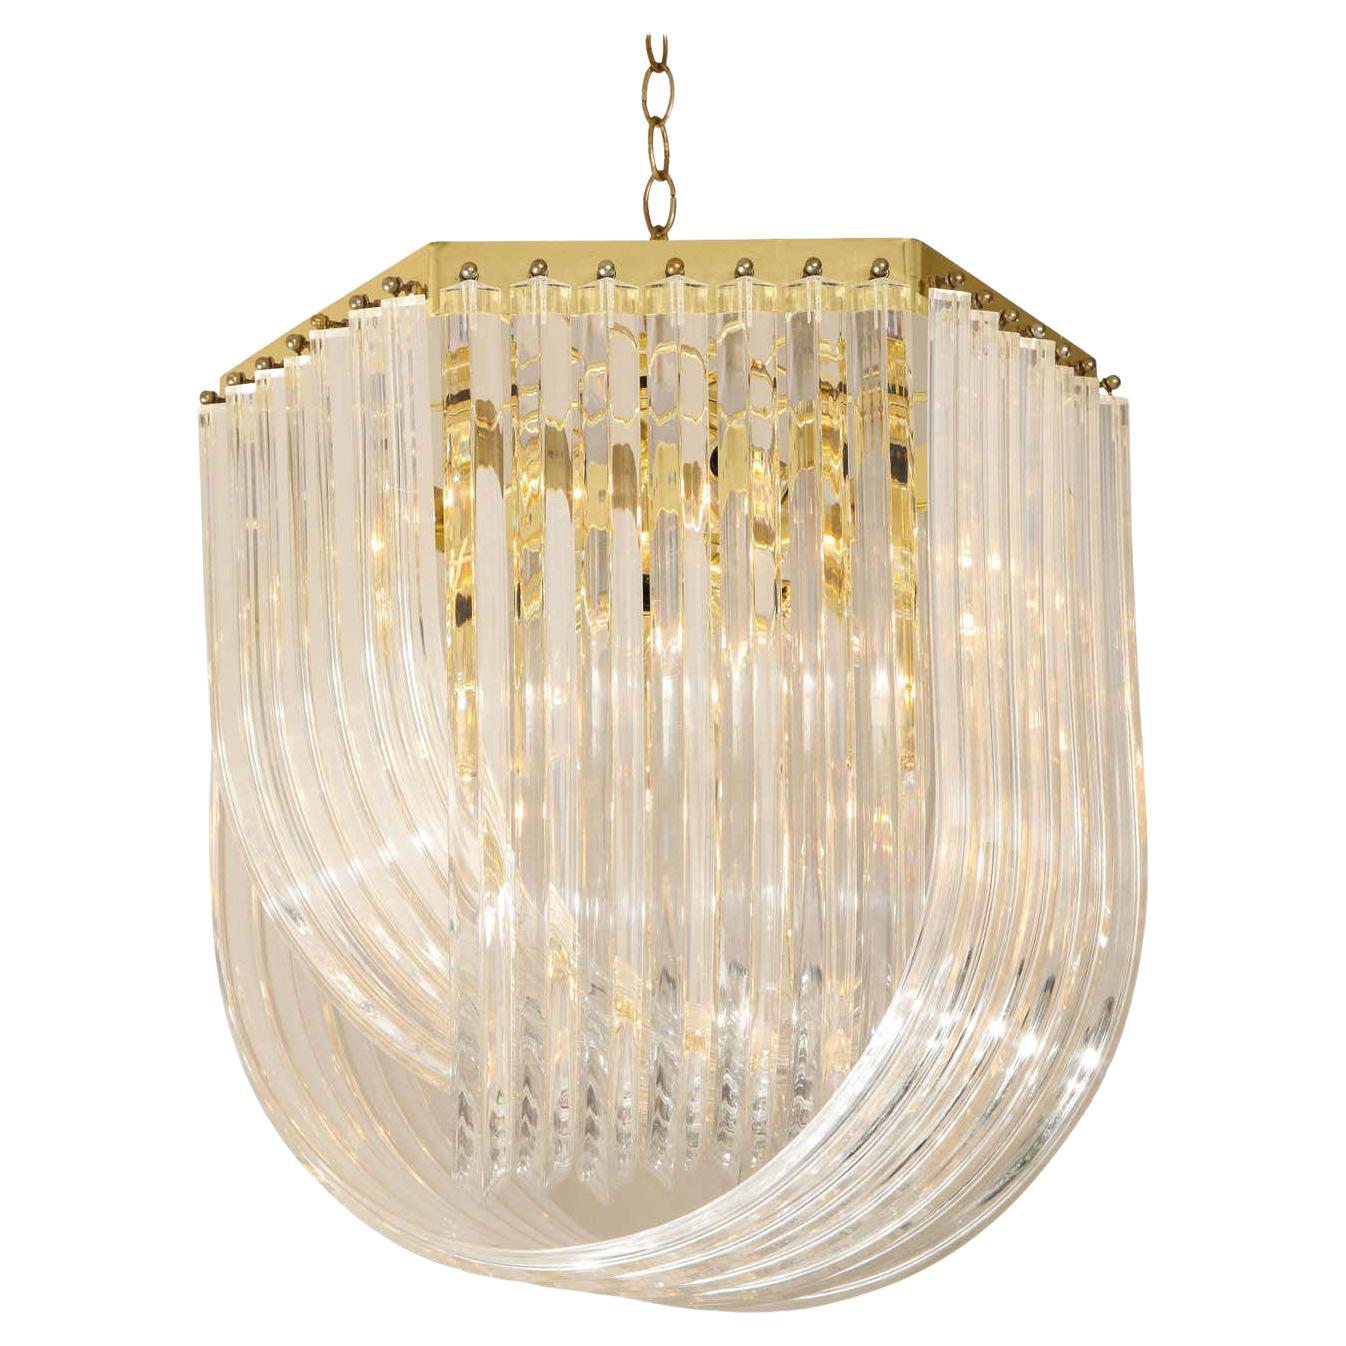 Midcentury Curved Lucite Ribbon Chandelier in Brass